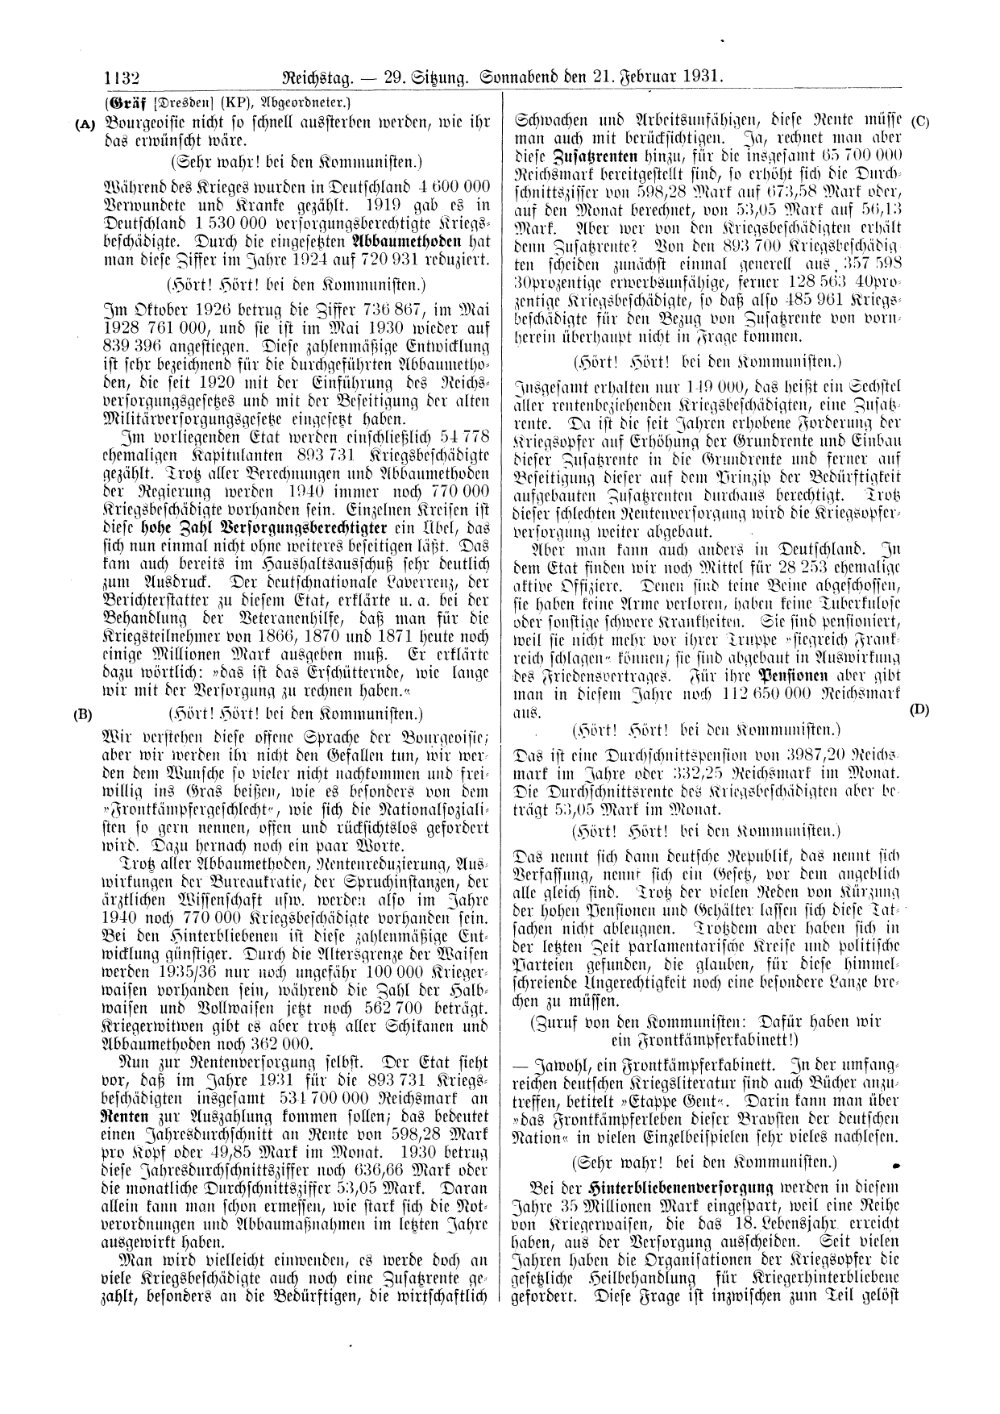 Scan of page 1132